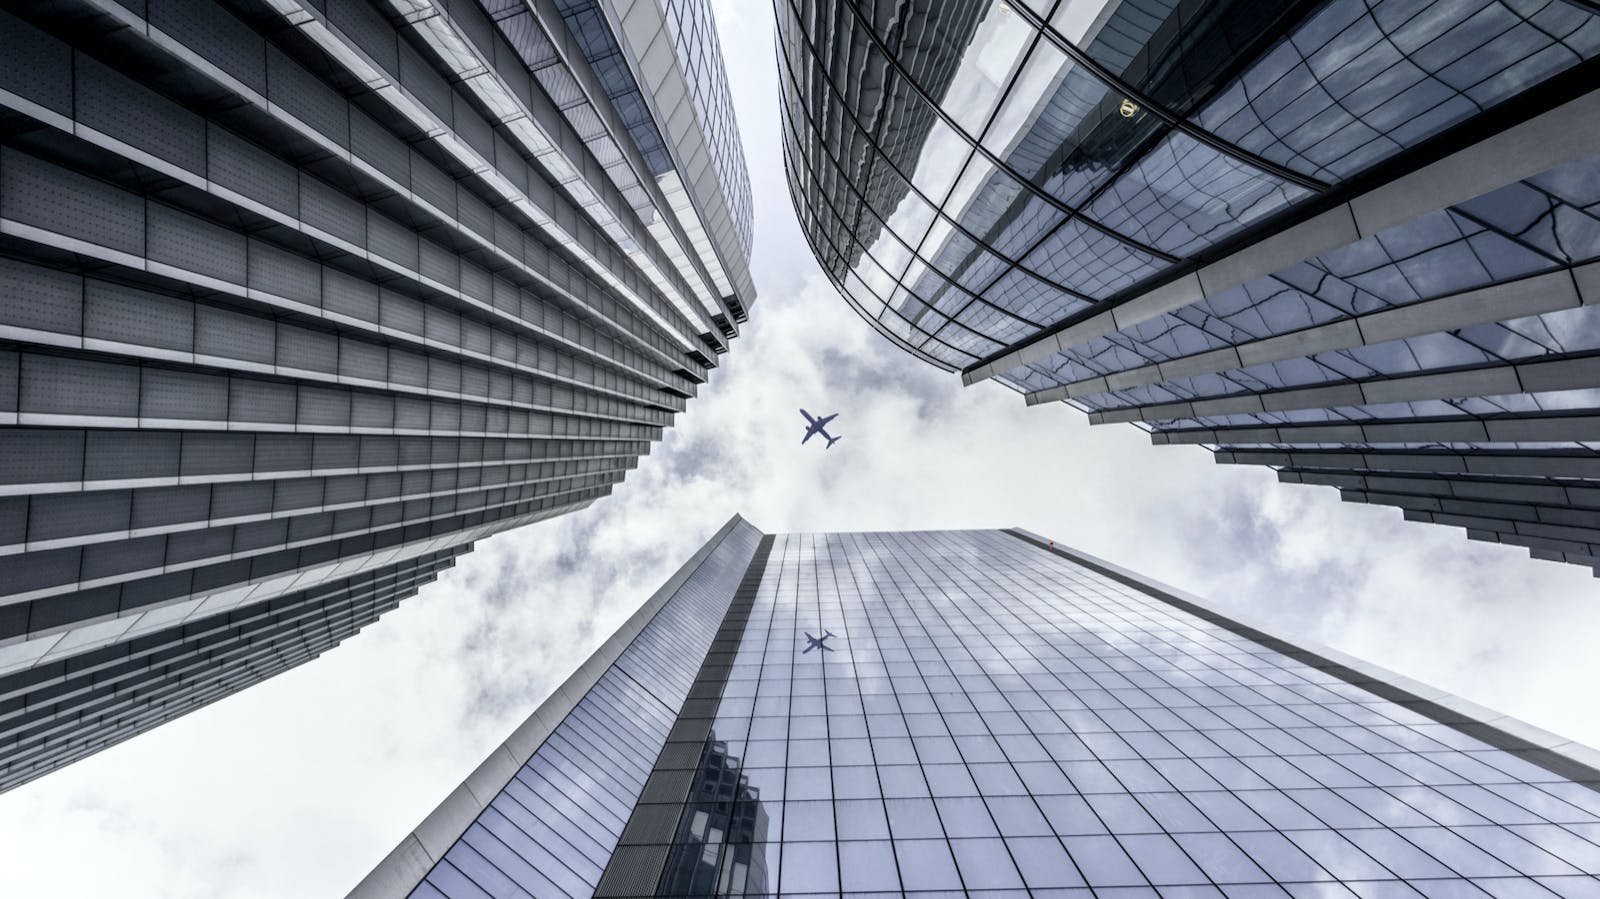 Image of a plane between buildings from a worm view